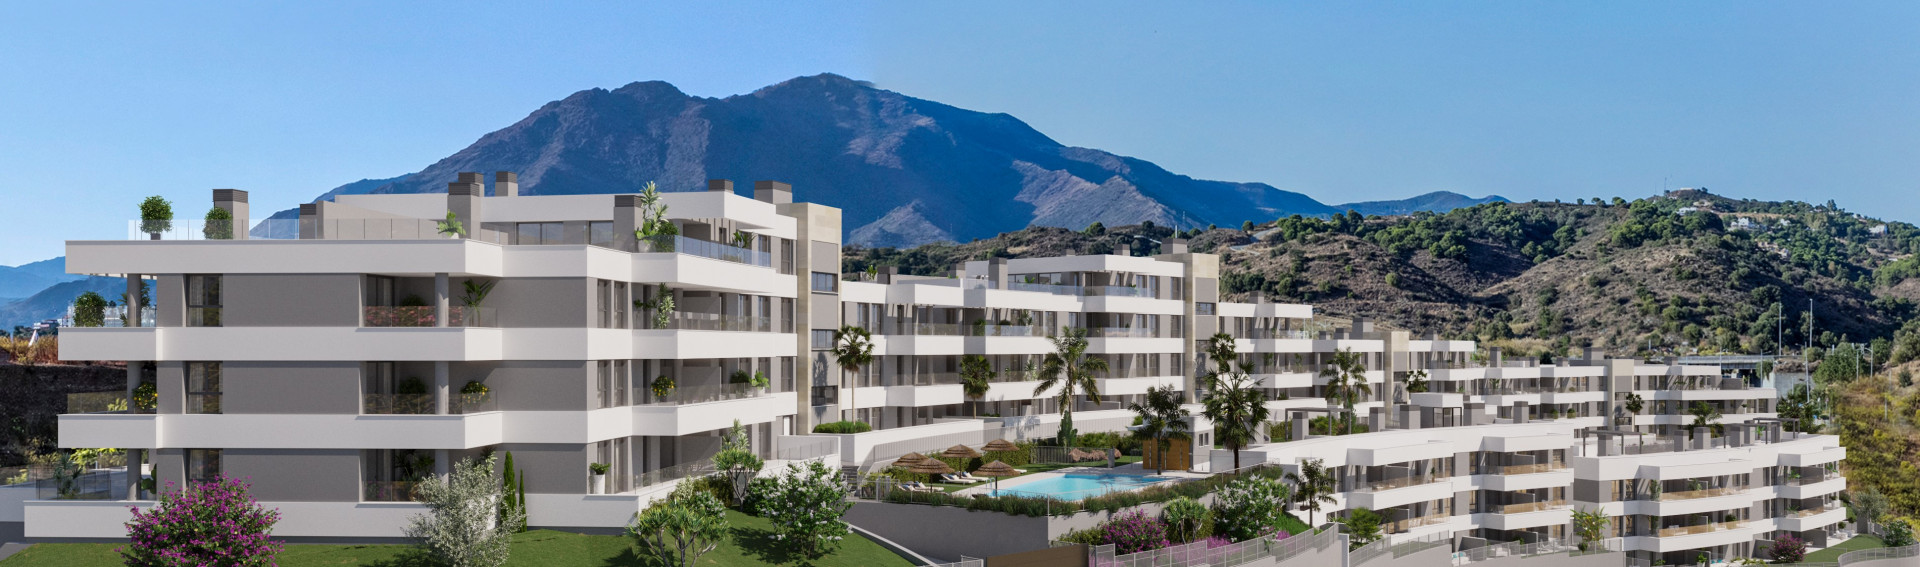 Scala: New residential complex with 1 to 4 bedroom homes located in Estepona. | Image 1